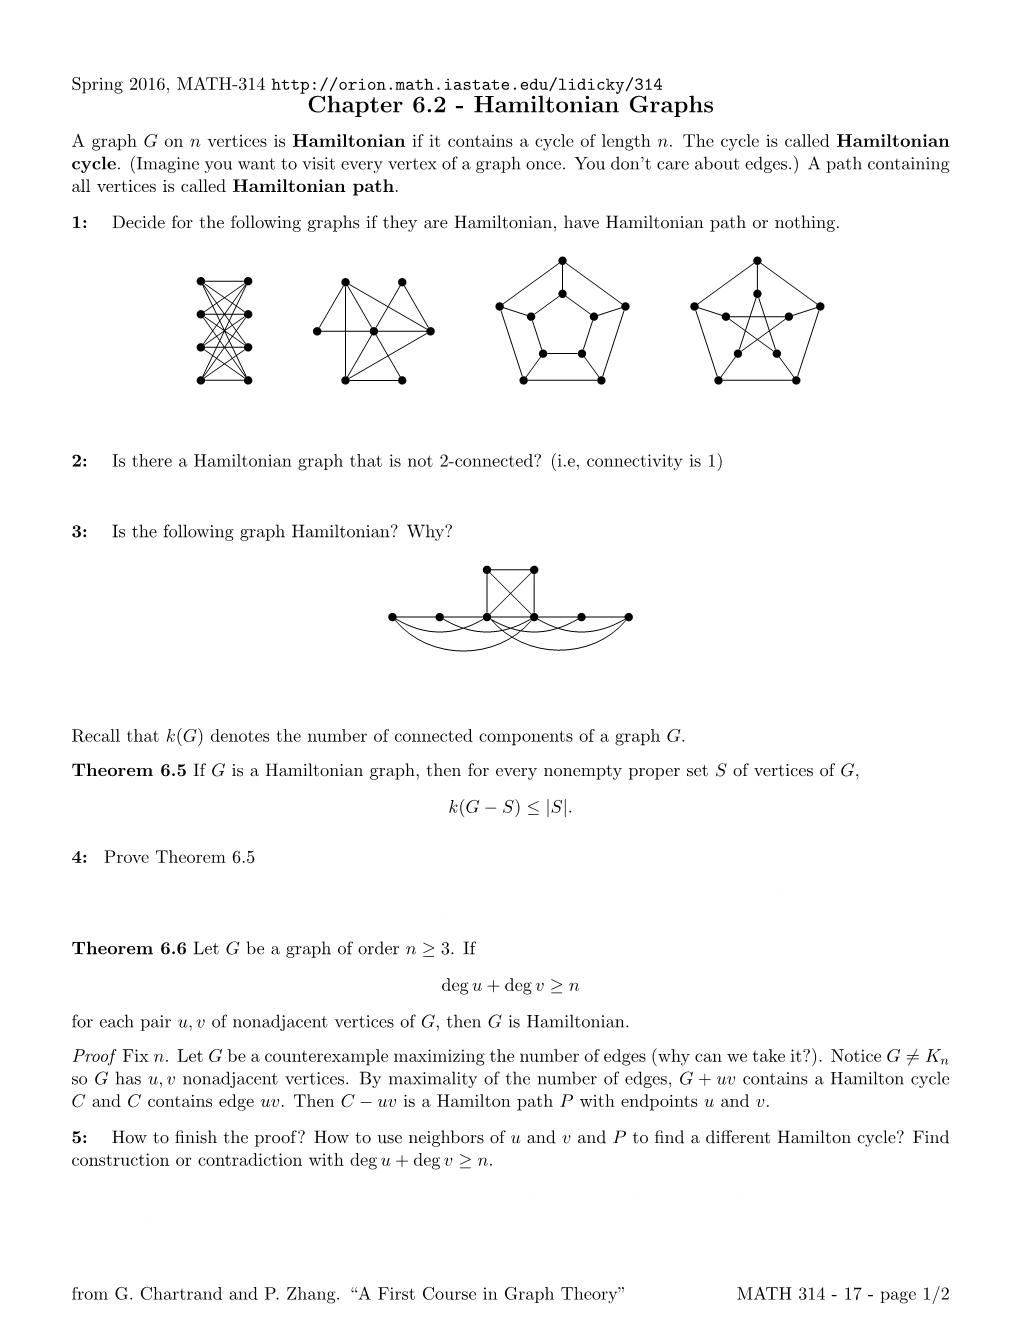 Chapter 6.2 - Hamiltonian Graphs a Graph G on N Vertices Is Hamiltonian If It Contains a Cycle of Length N